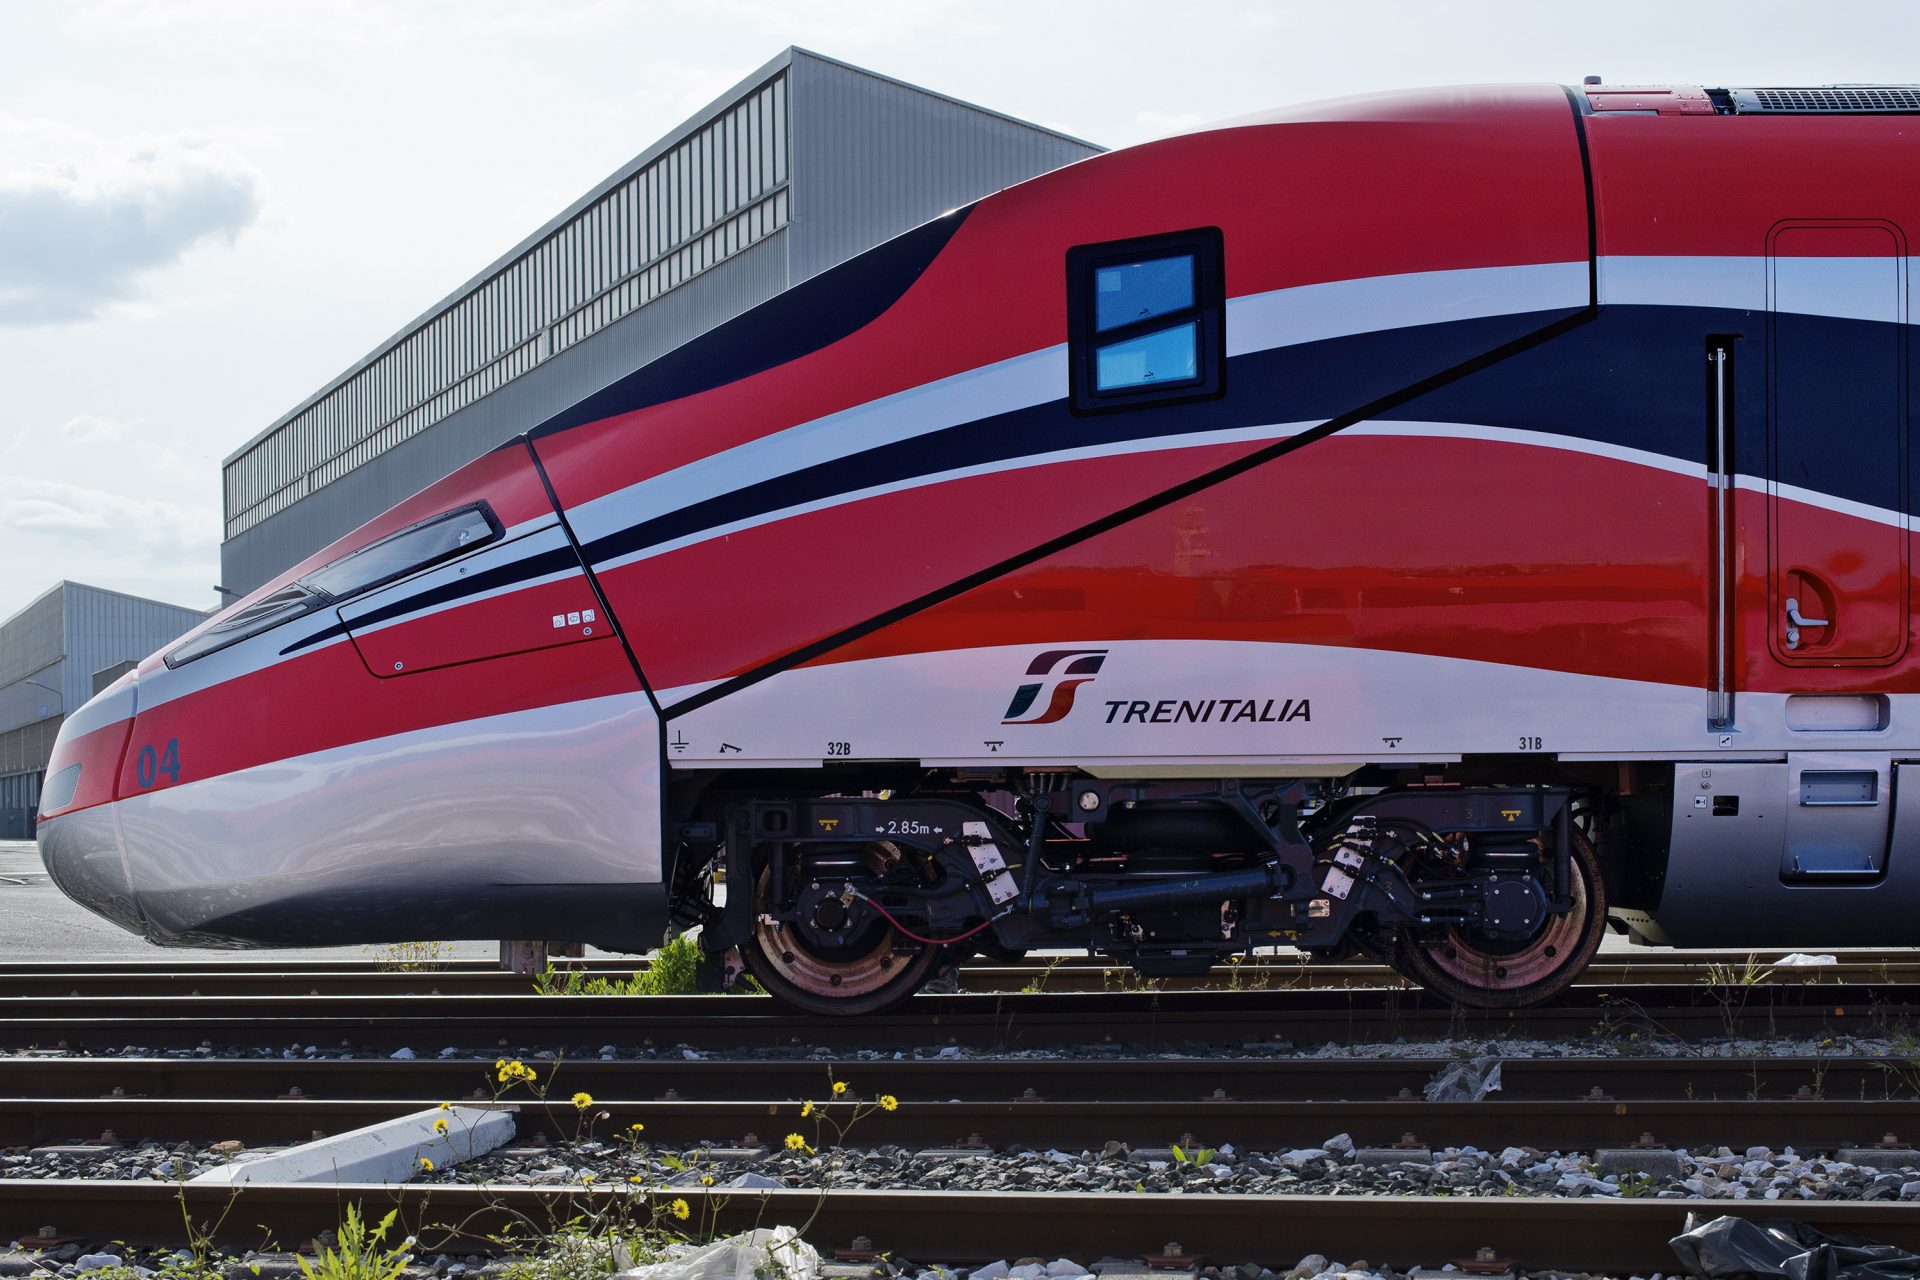 <p><span>Italian State Railways' Frecciarossa, or the "Red Arrow" in English, are a series of high-speed trains introduced in 2017. The Red Arrow trains can reach the impressive maximum speed of 400 km per hour (250mph) and boast 10,000 horsepower in output. </span></p>